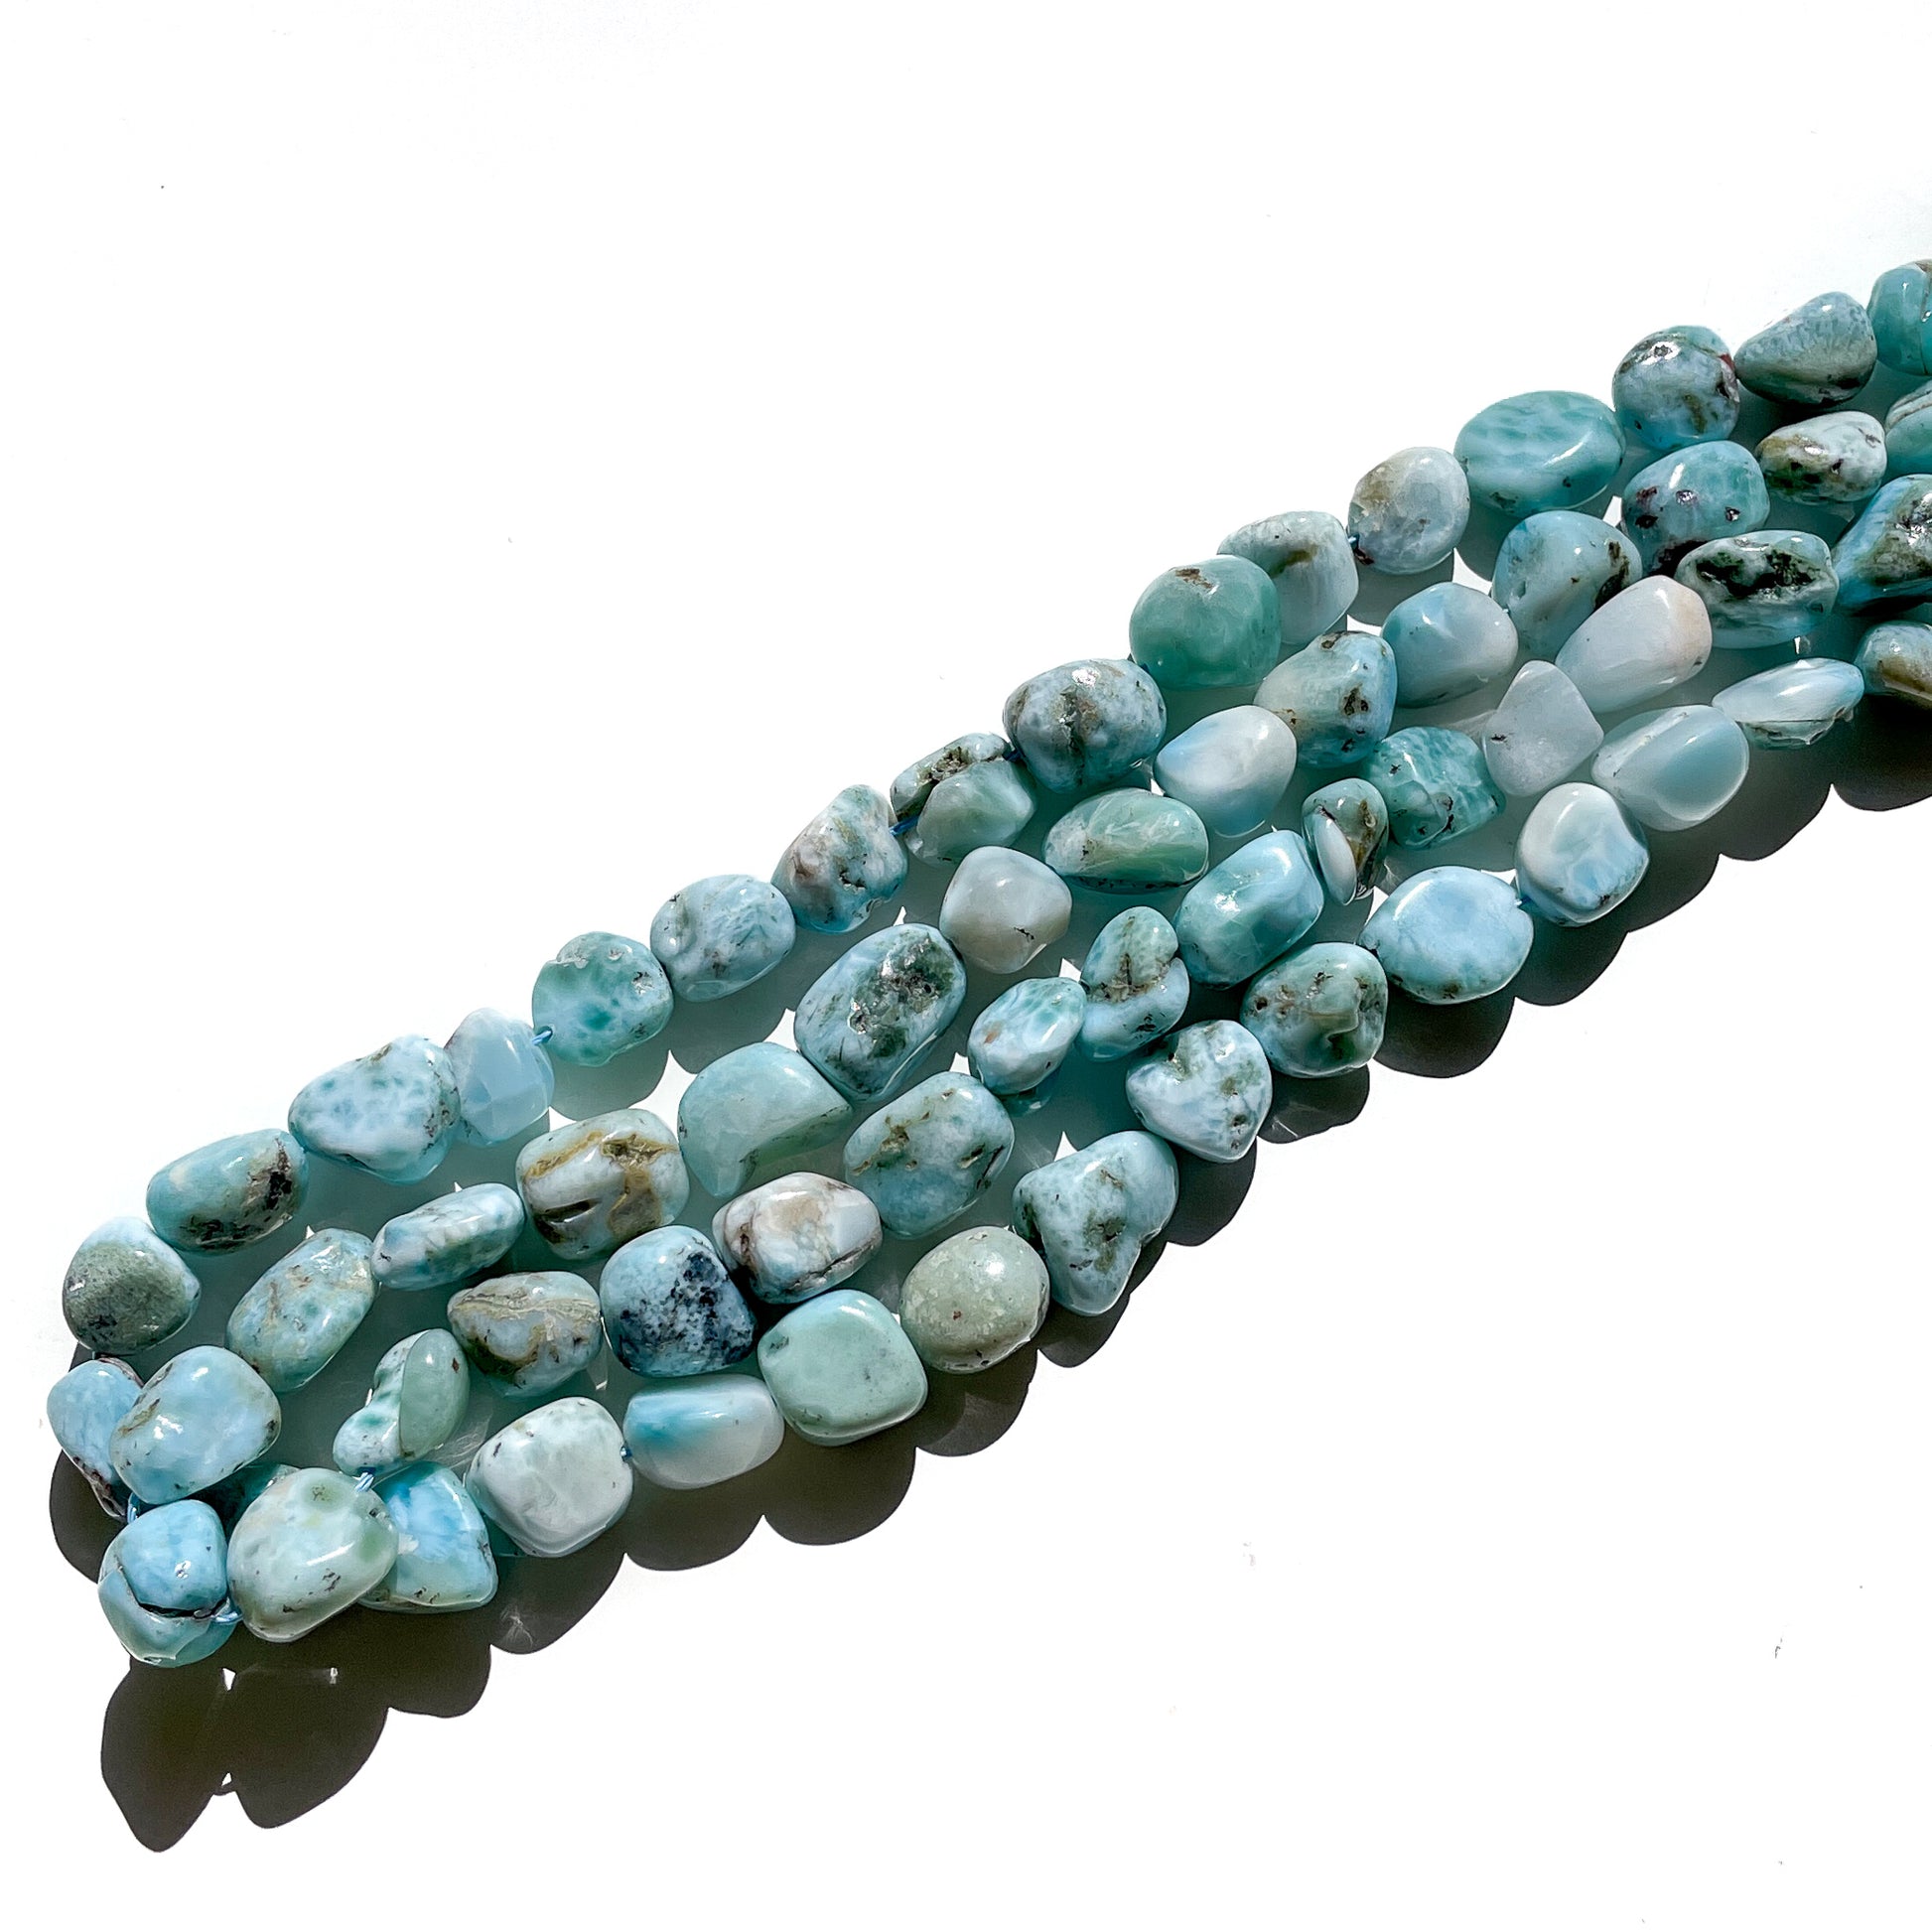 Larimar 11-14mm Tumbled Nugget Bead (Available in 2 Quantities)